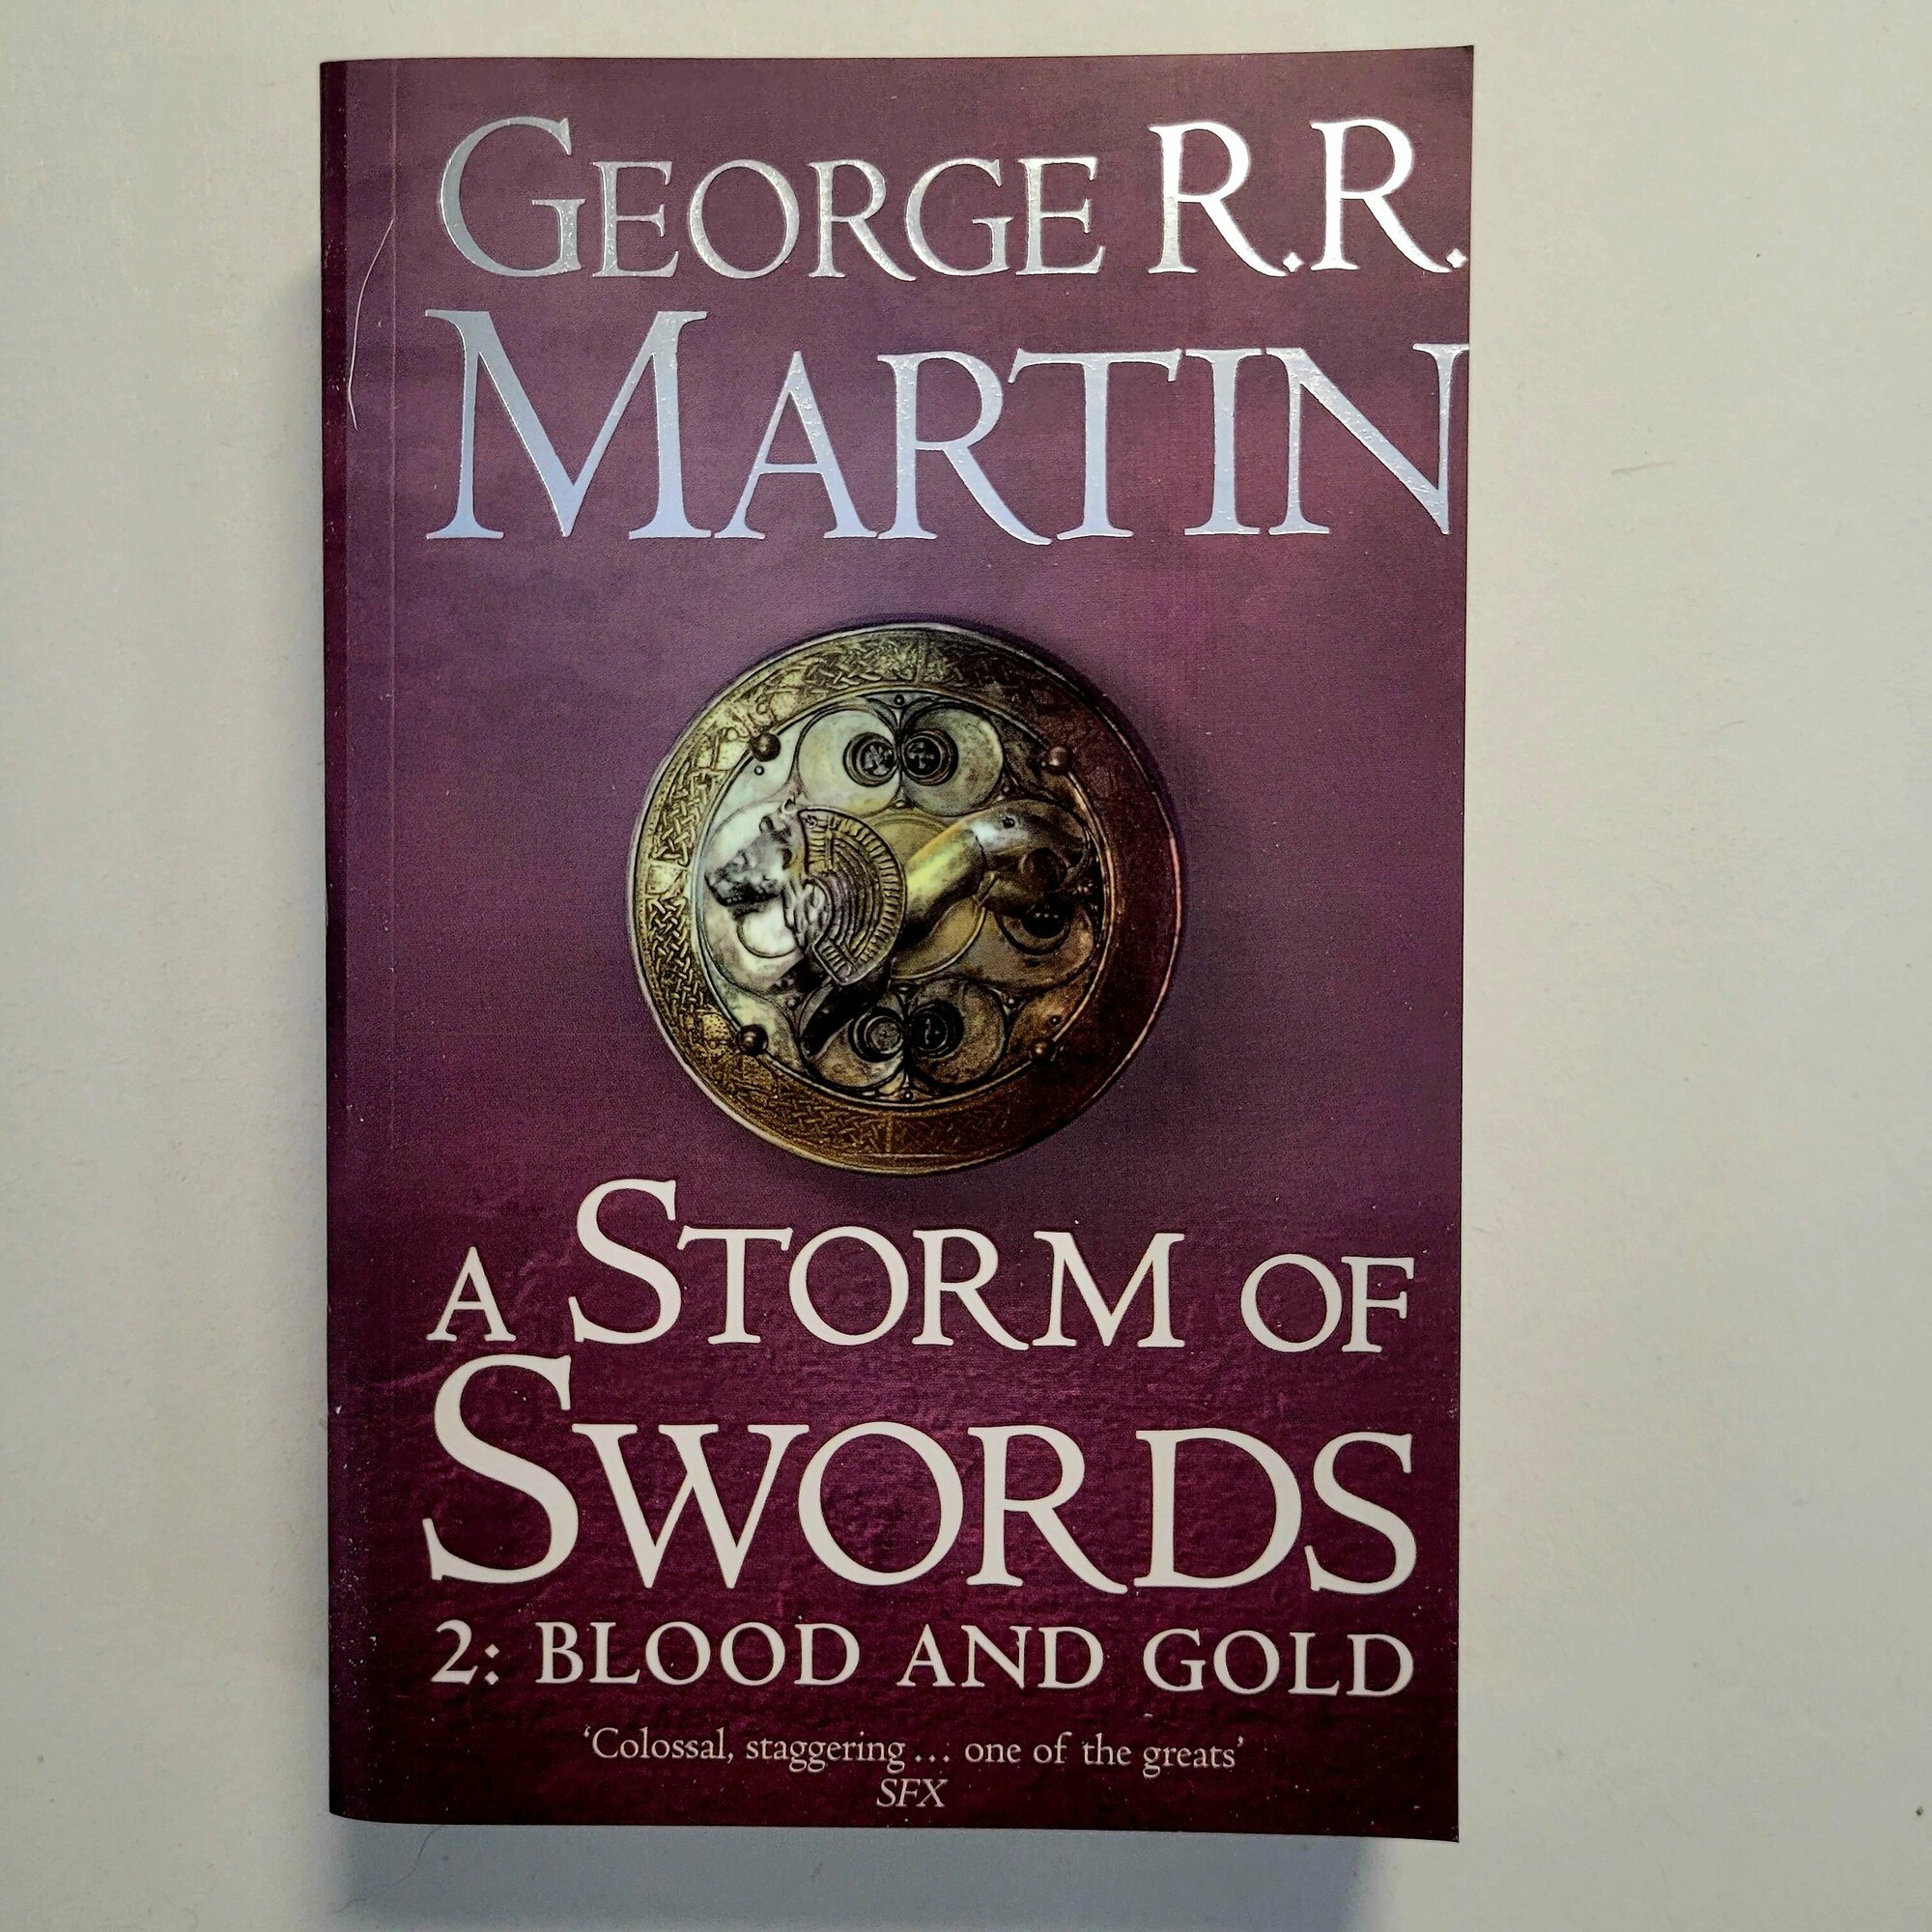 George R.R. Martin. A Storm of Swords. Part 2: Blood and Gold. (Book 3, part 2 A Game of Thrones)